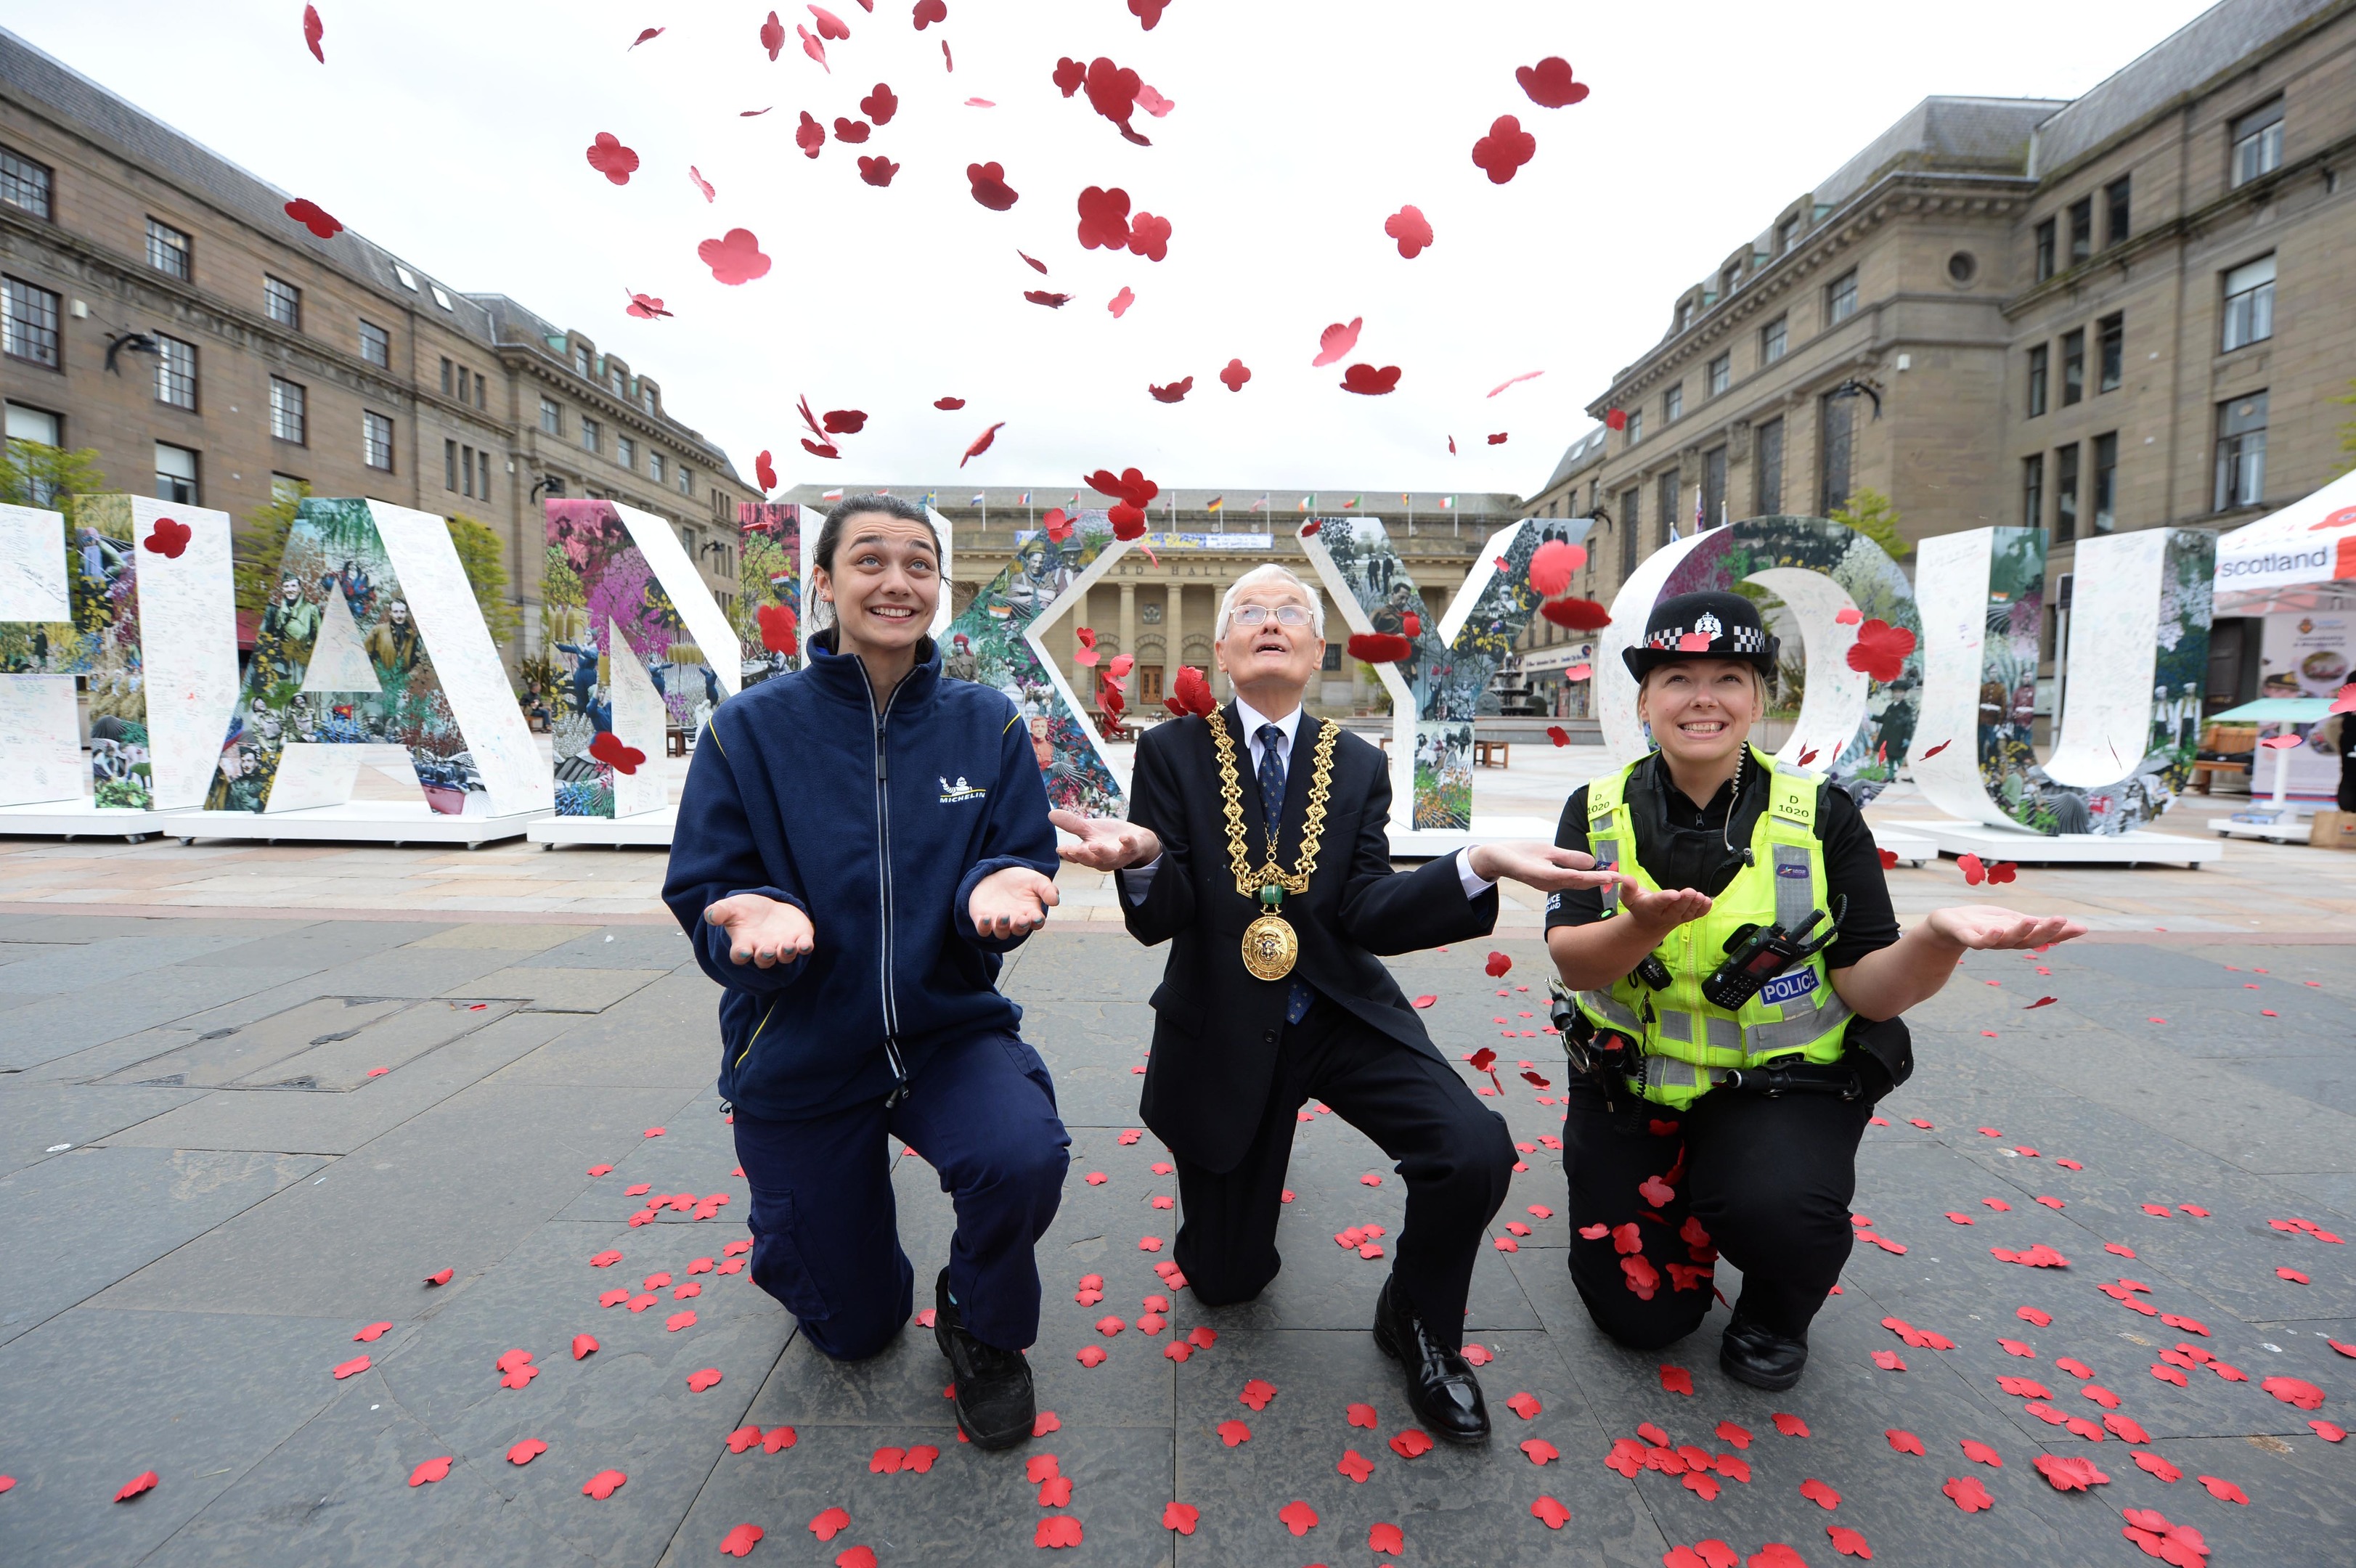 From left: Sarah King from Michelin, Lord Provost Ian Borthwick and PC Victoria O'Neil.